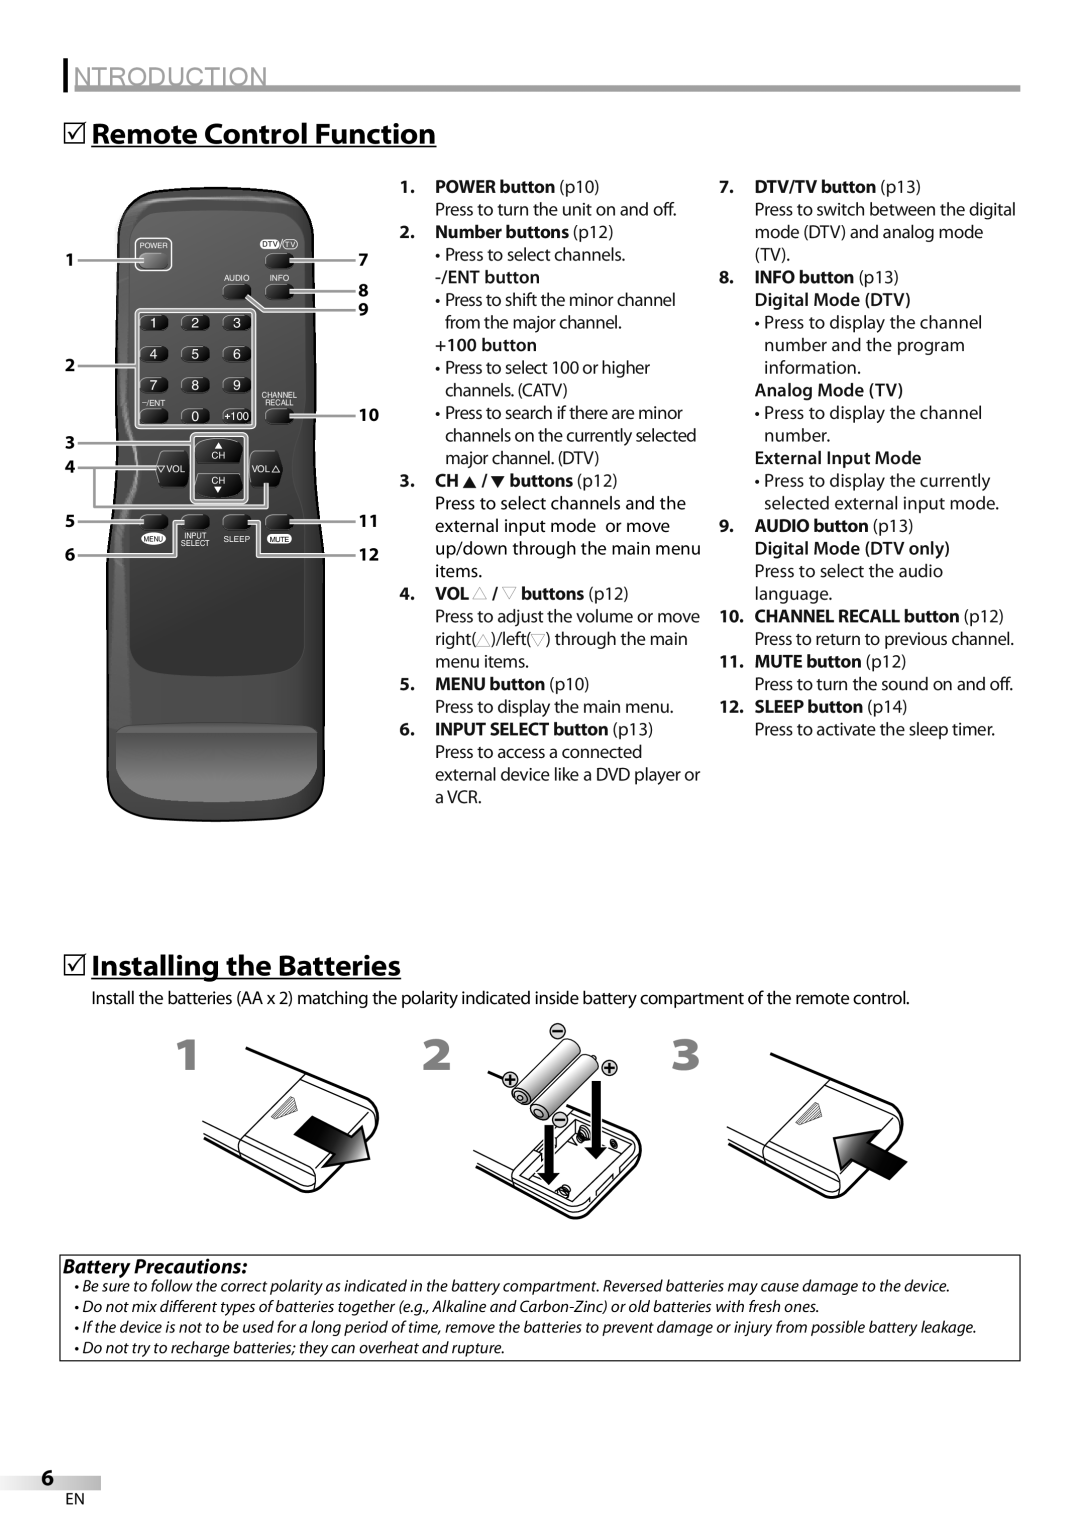 FUNAI CR130DR8 5Remote Control Function, 5Installing the Batteries, Introduction, Battery Precautions, POWER button p10 